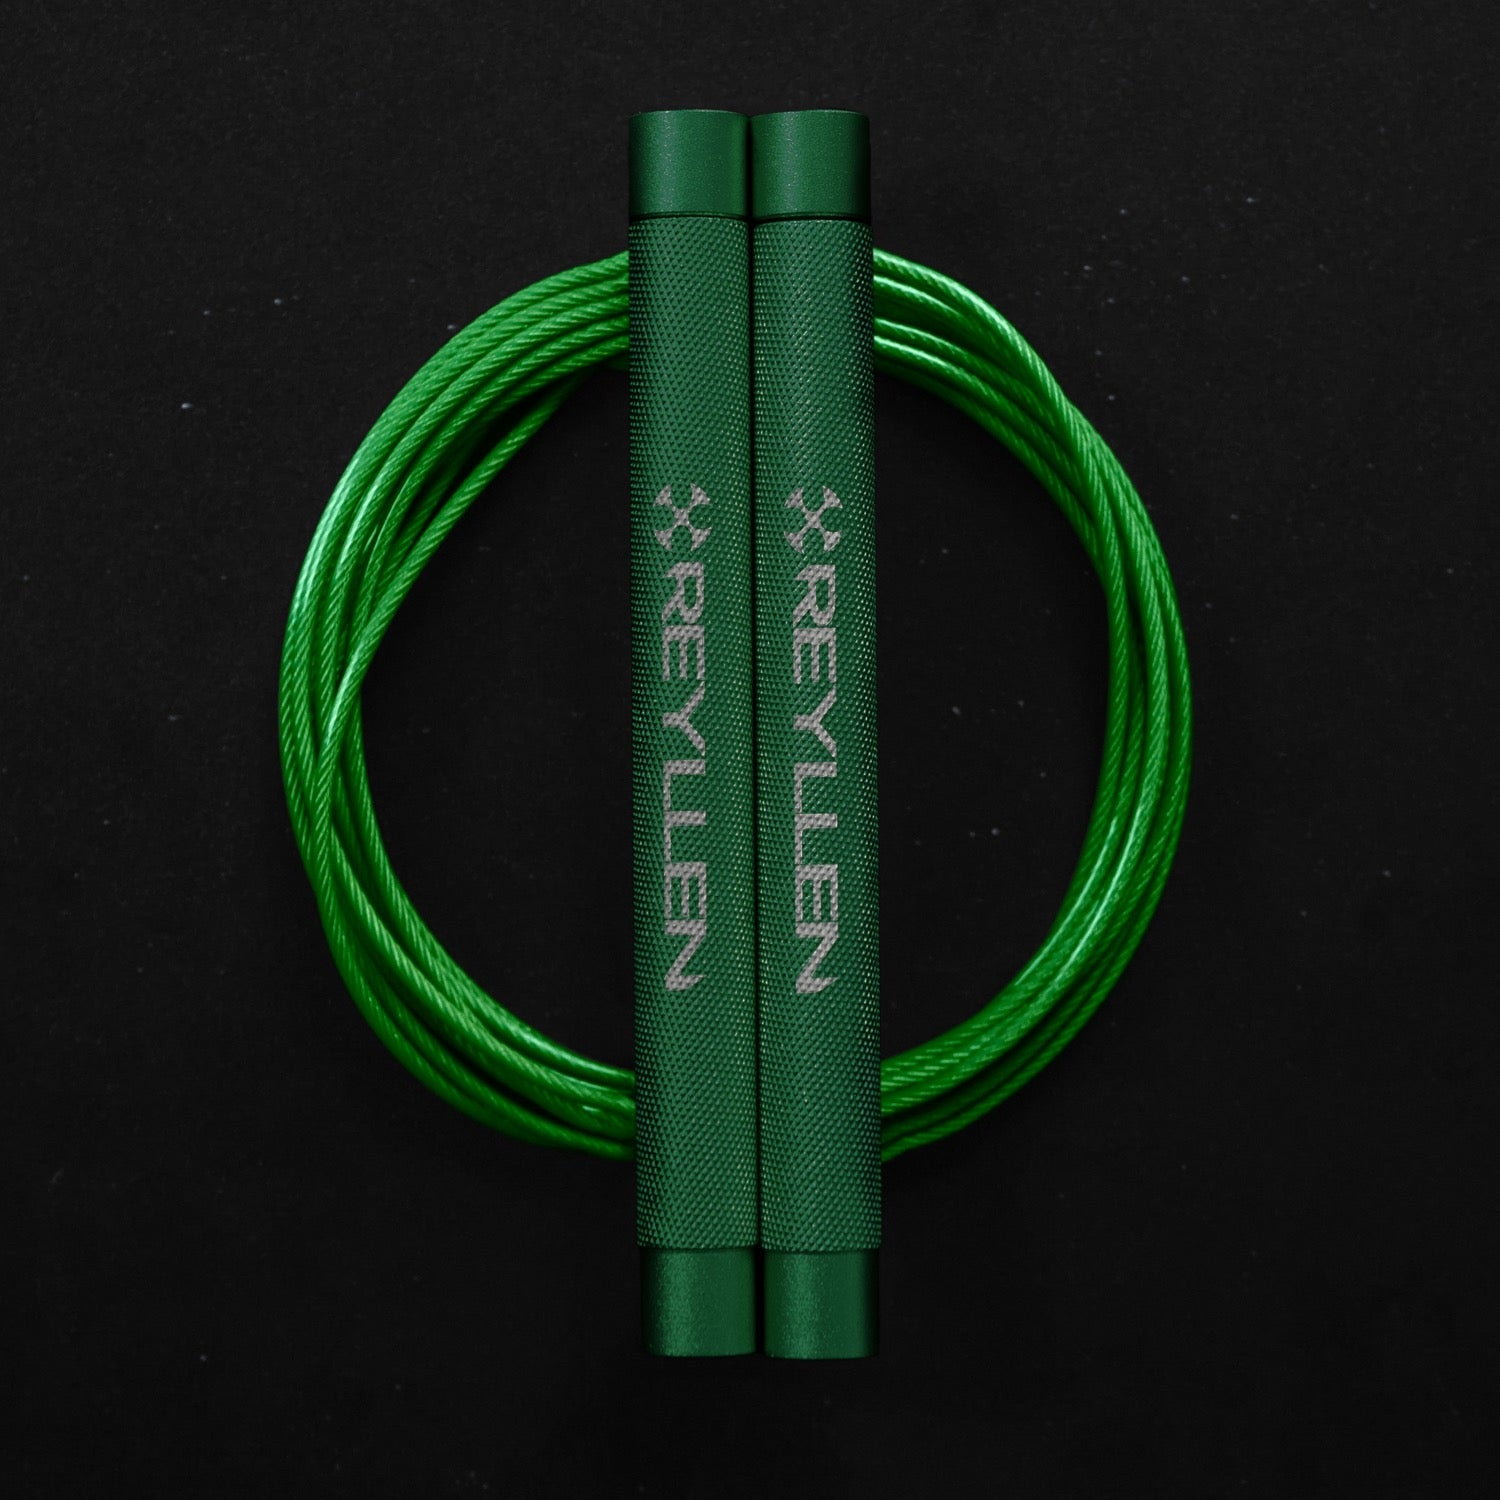 Reyllen Flare Mx Speed Skipping Jump Rope - Aluminium Handles - green with green pvc cable